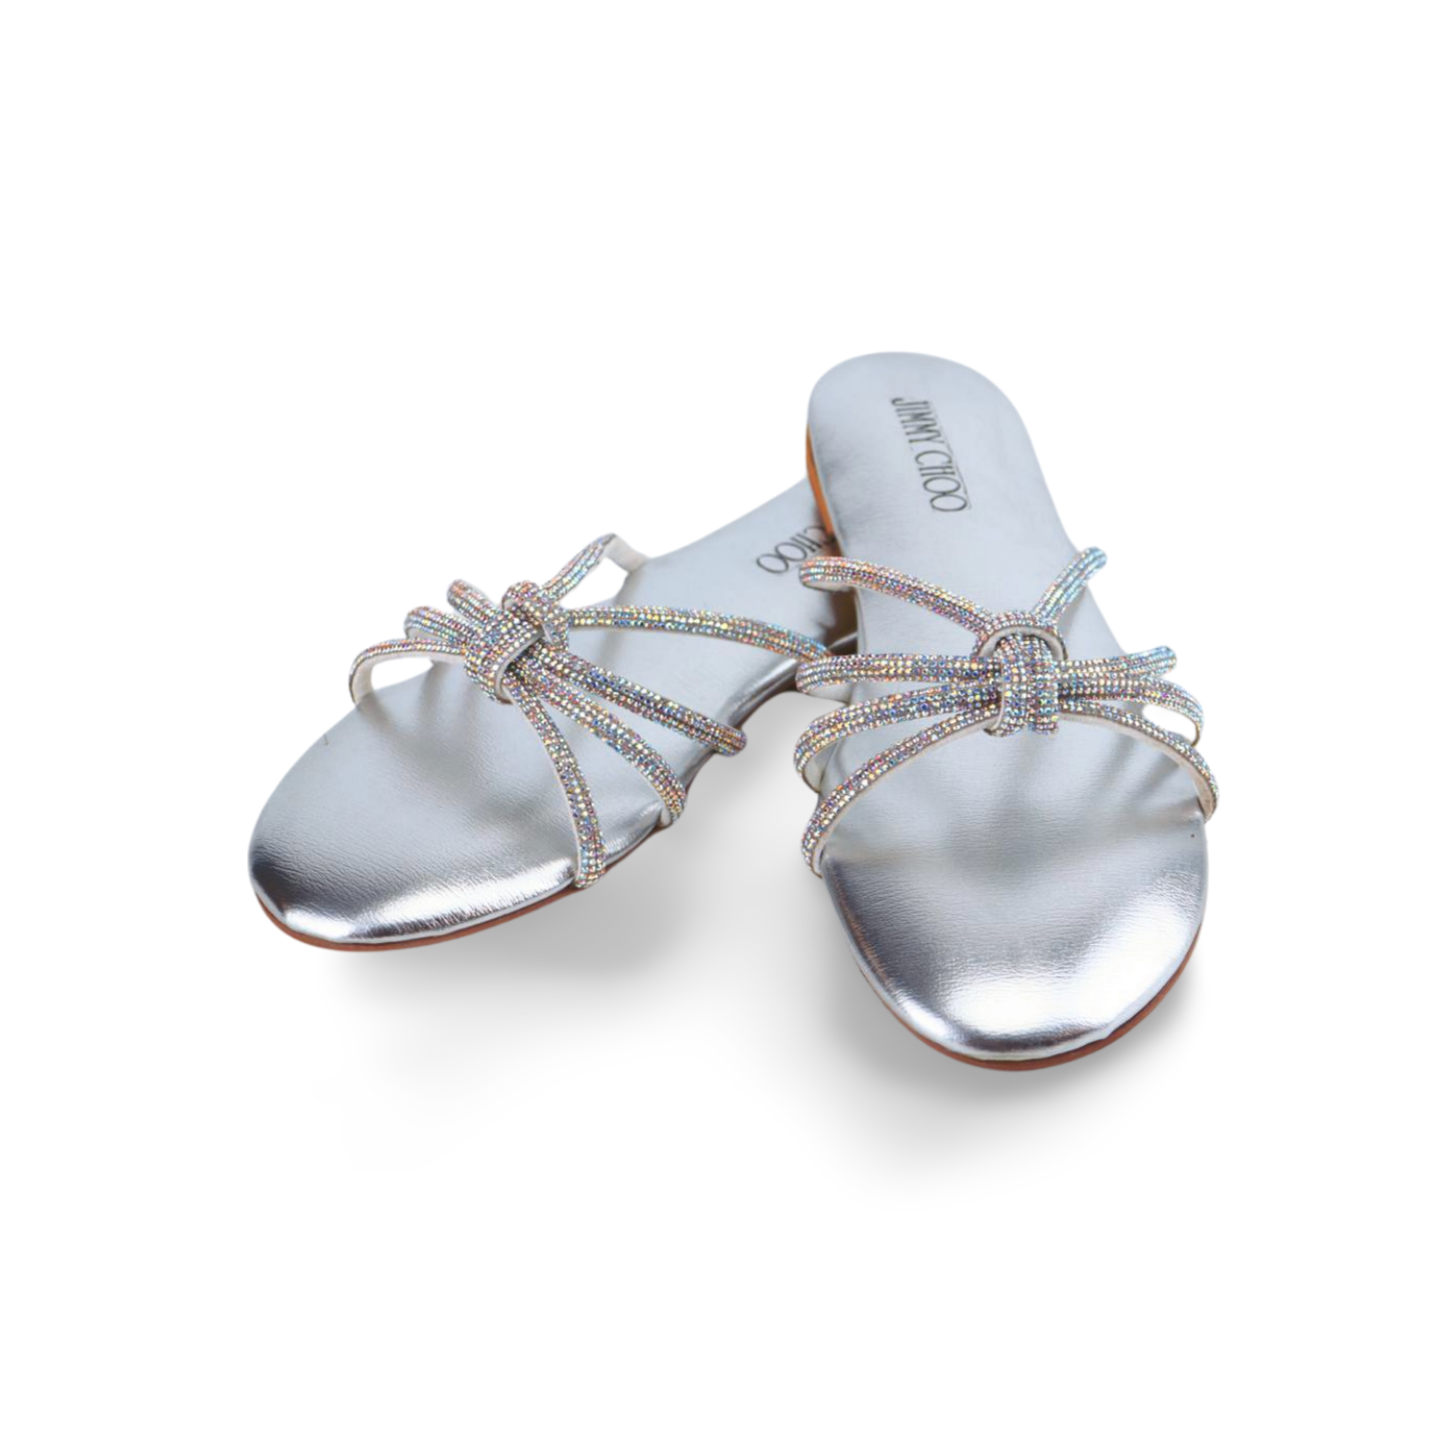 Women's Sandals with Rhinestones and Bows